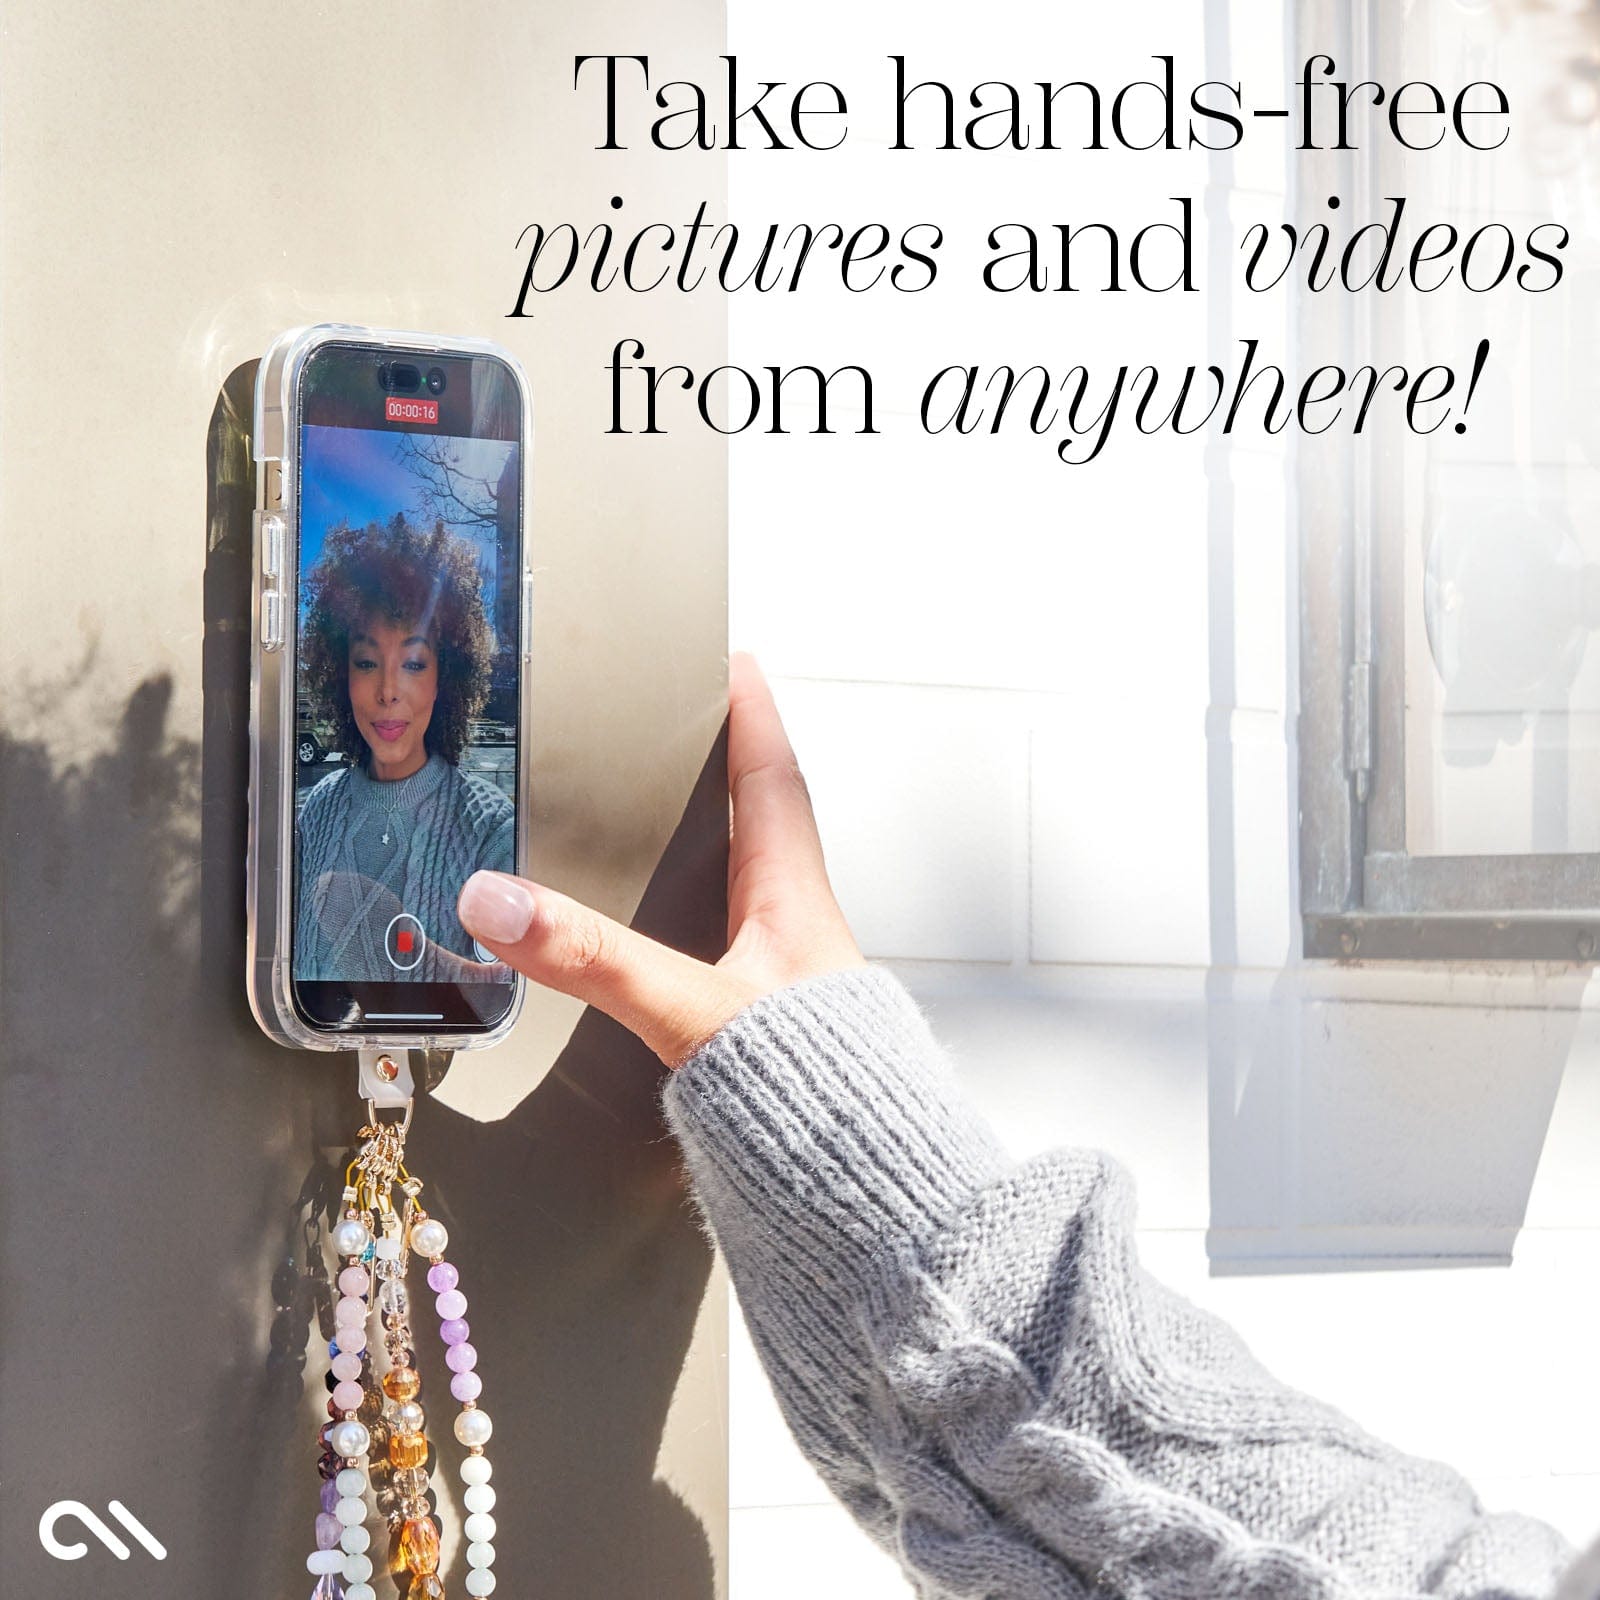 TAKE HANDS-FREE PICTURES AND VIDEOS FROM ANYWHERE!